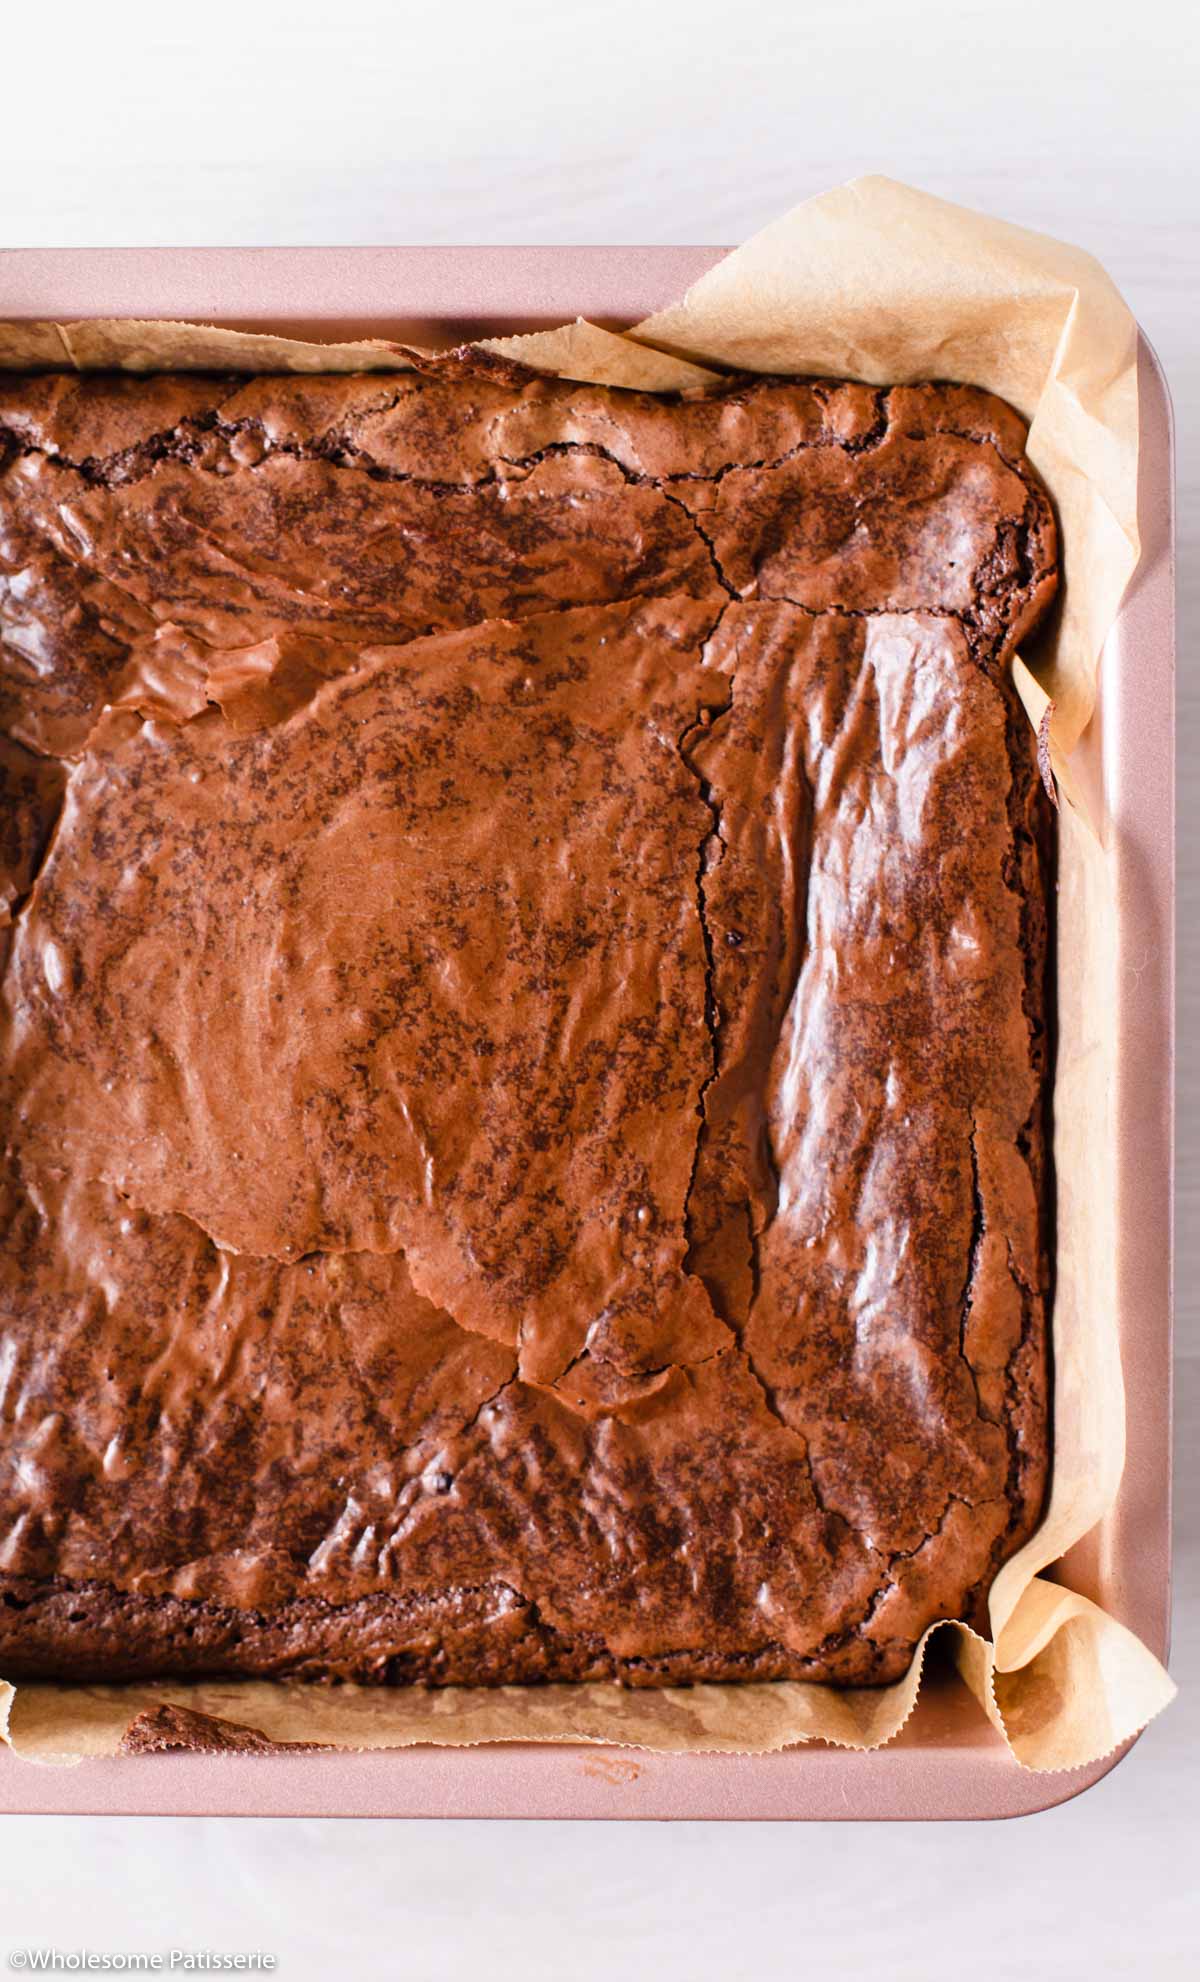 Brownies baked and cooling in the pan